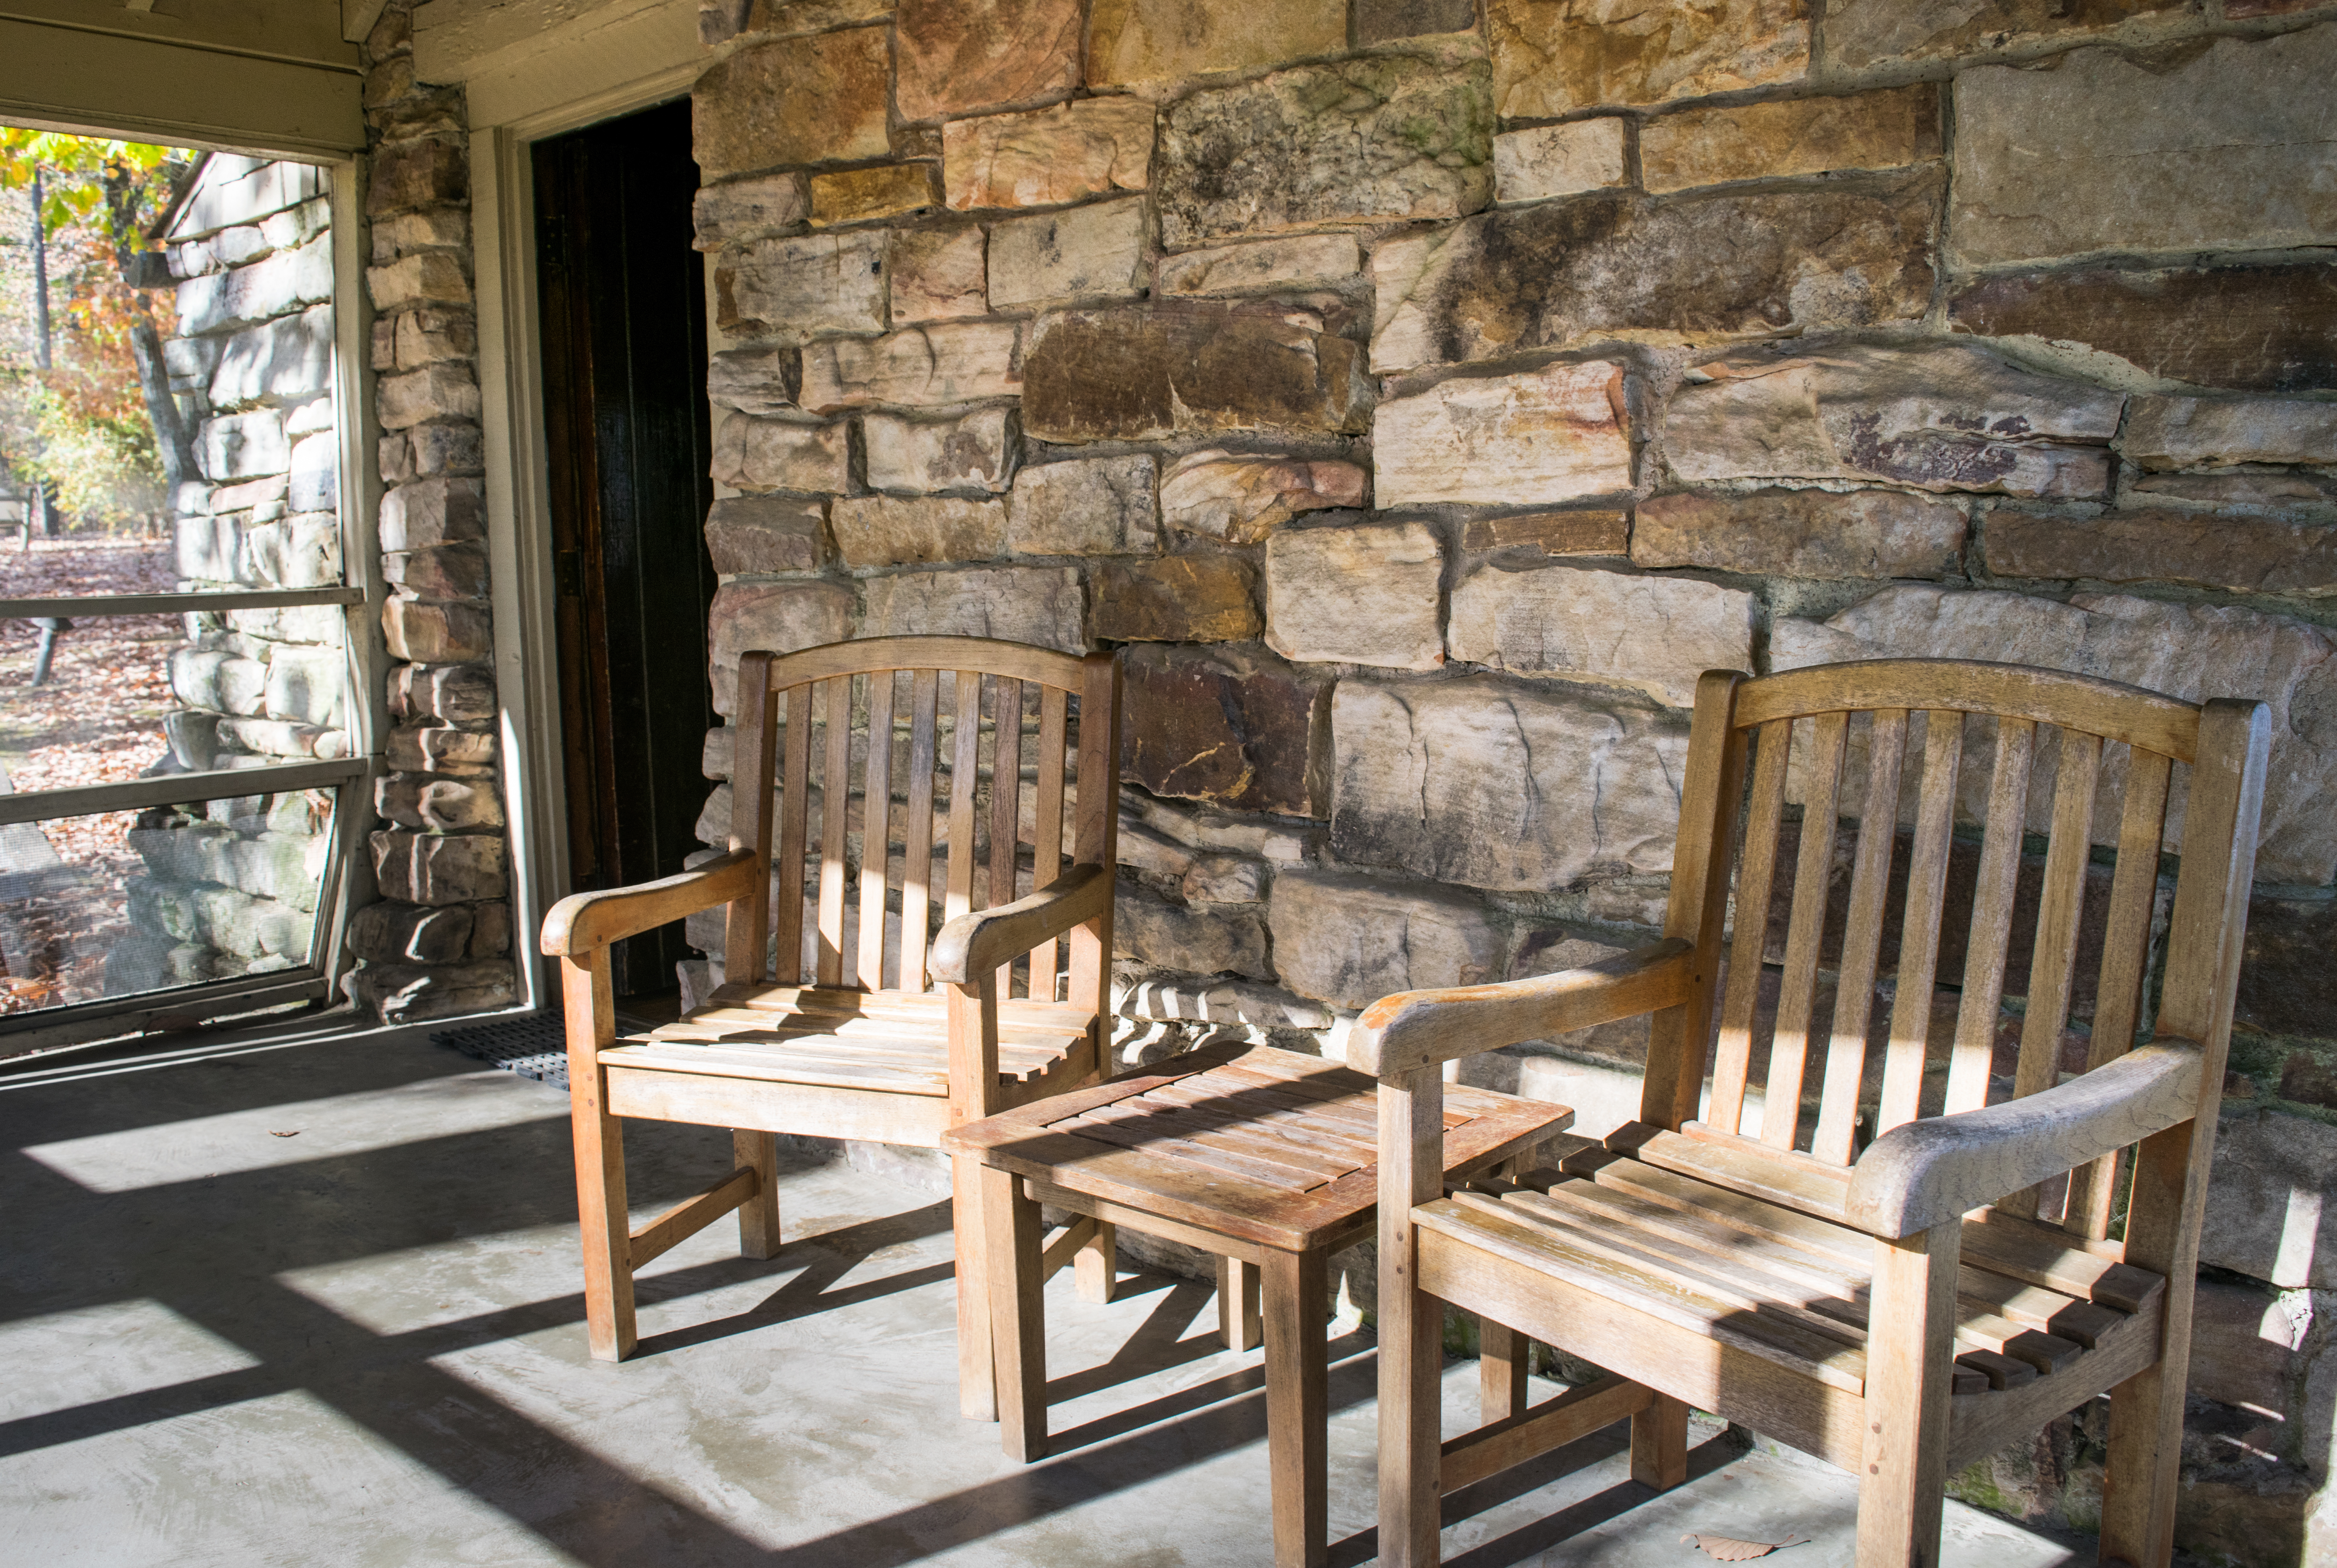 Rocking Chairs on Screened Porch at Rustic Cabin Monte Sano State Park